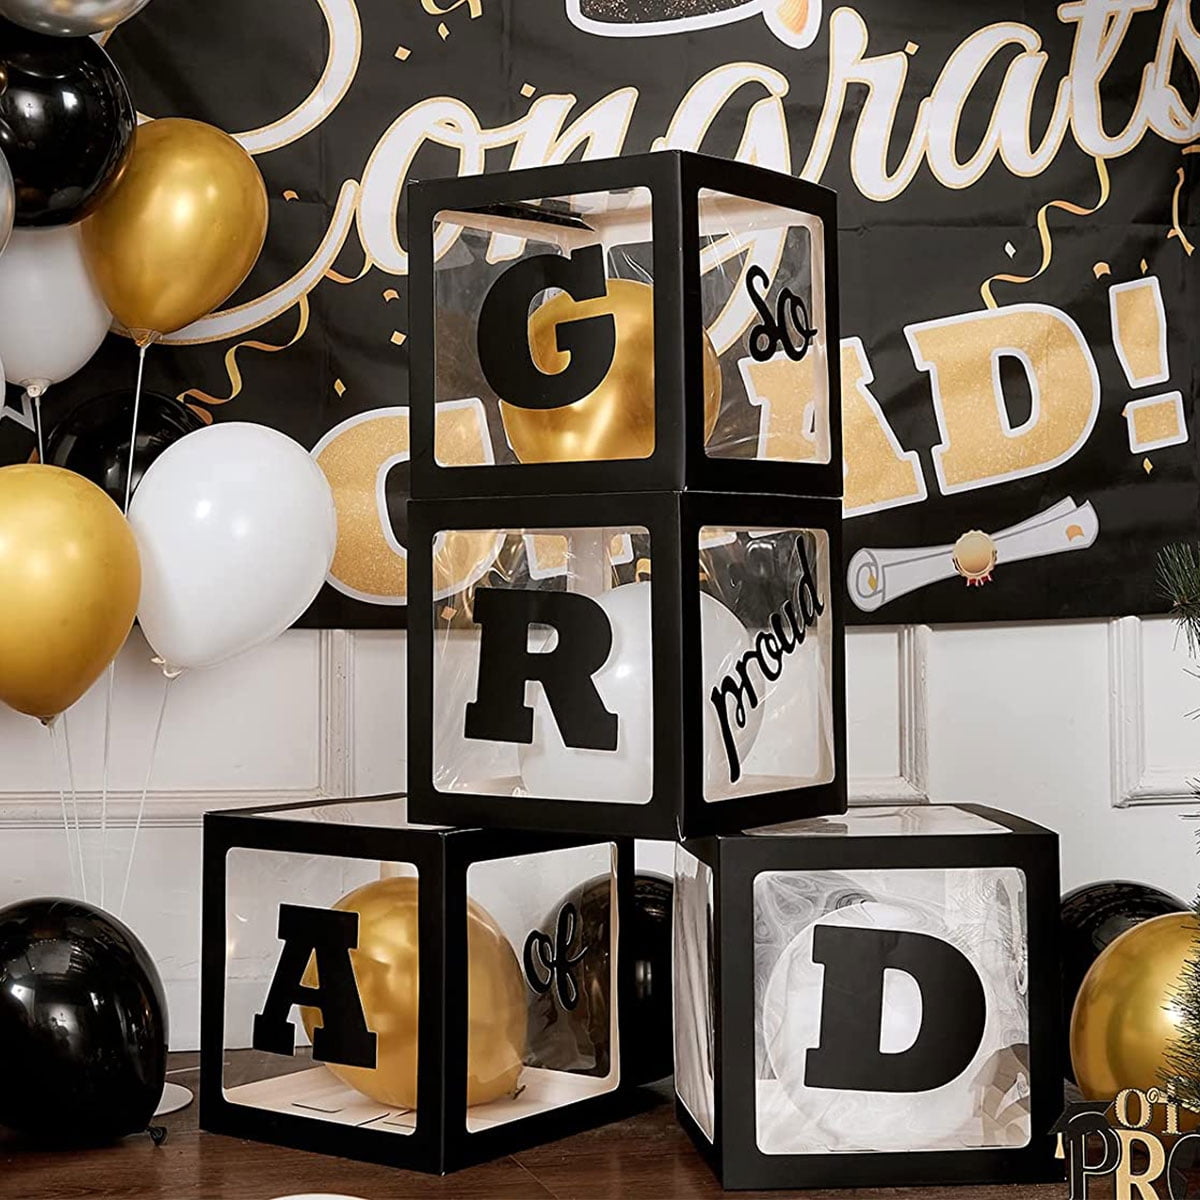 Anders Zeldzaamheid Onvergetelijk Balloon Box Decorations 2022 Graduation Party Reusable and Foldable with 12  Paper Cards and 24 Balloons Celebration Party Supplies for College High  School Graduation 4pcs,Black - Walmart.com